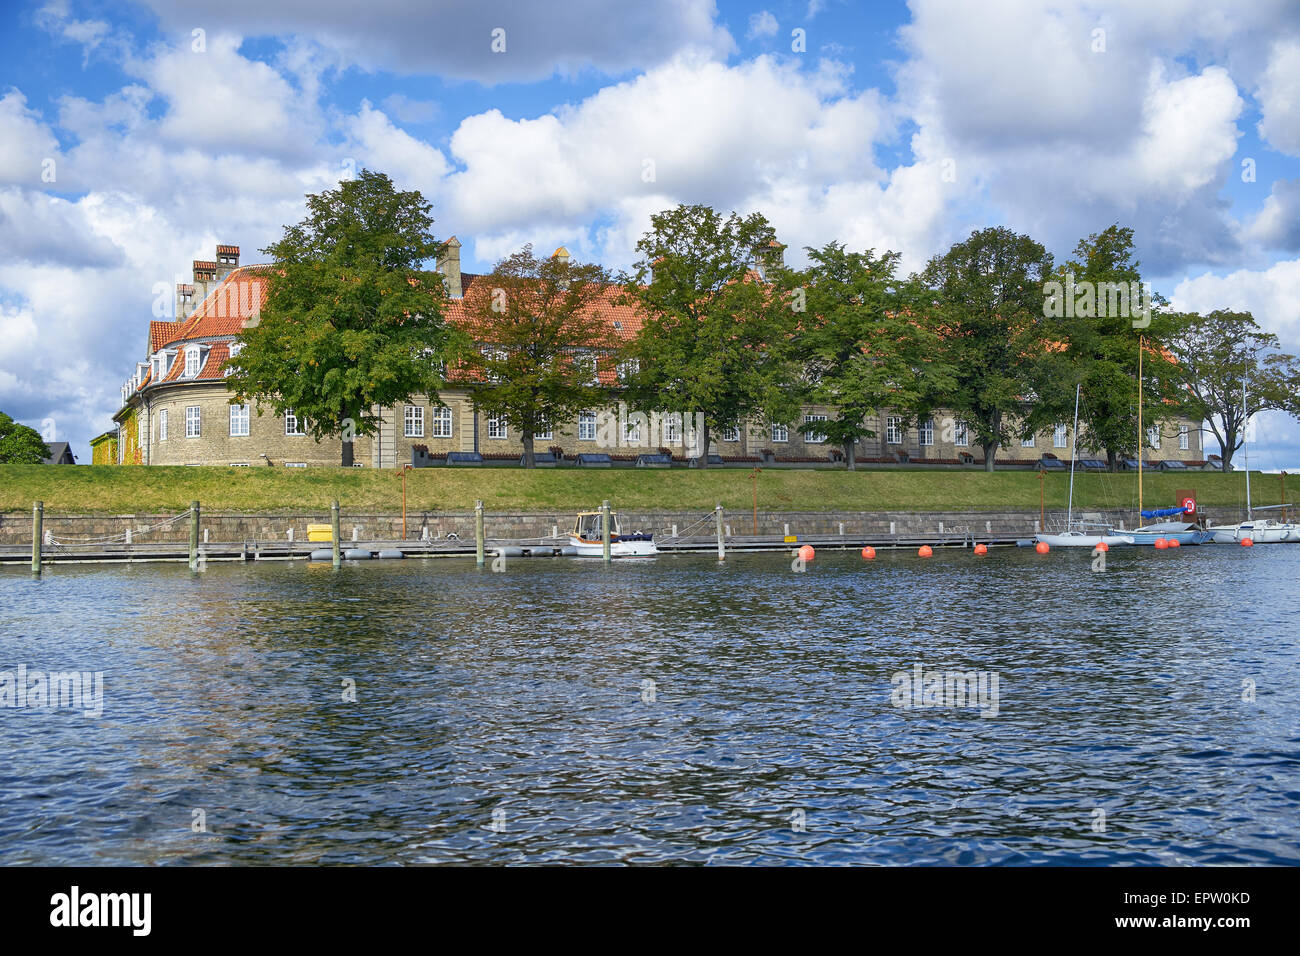 The red roof house. The view from the channel Holmen. Copenhagen. Denmark. Stock Photo